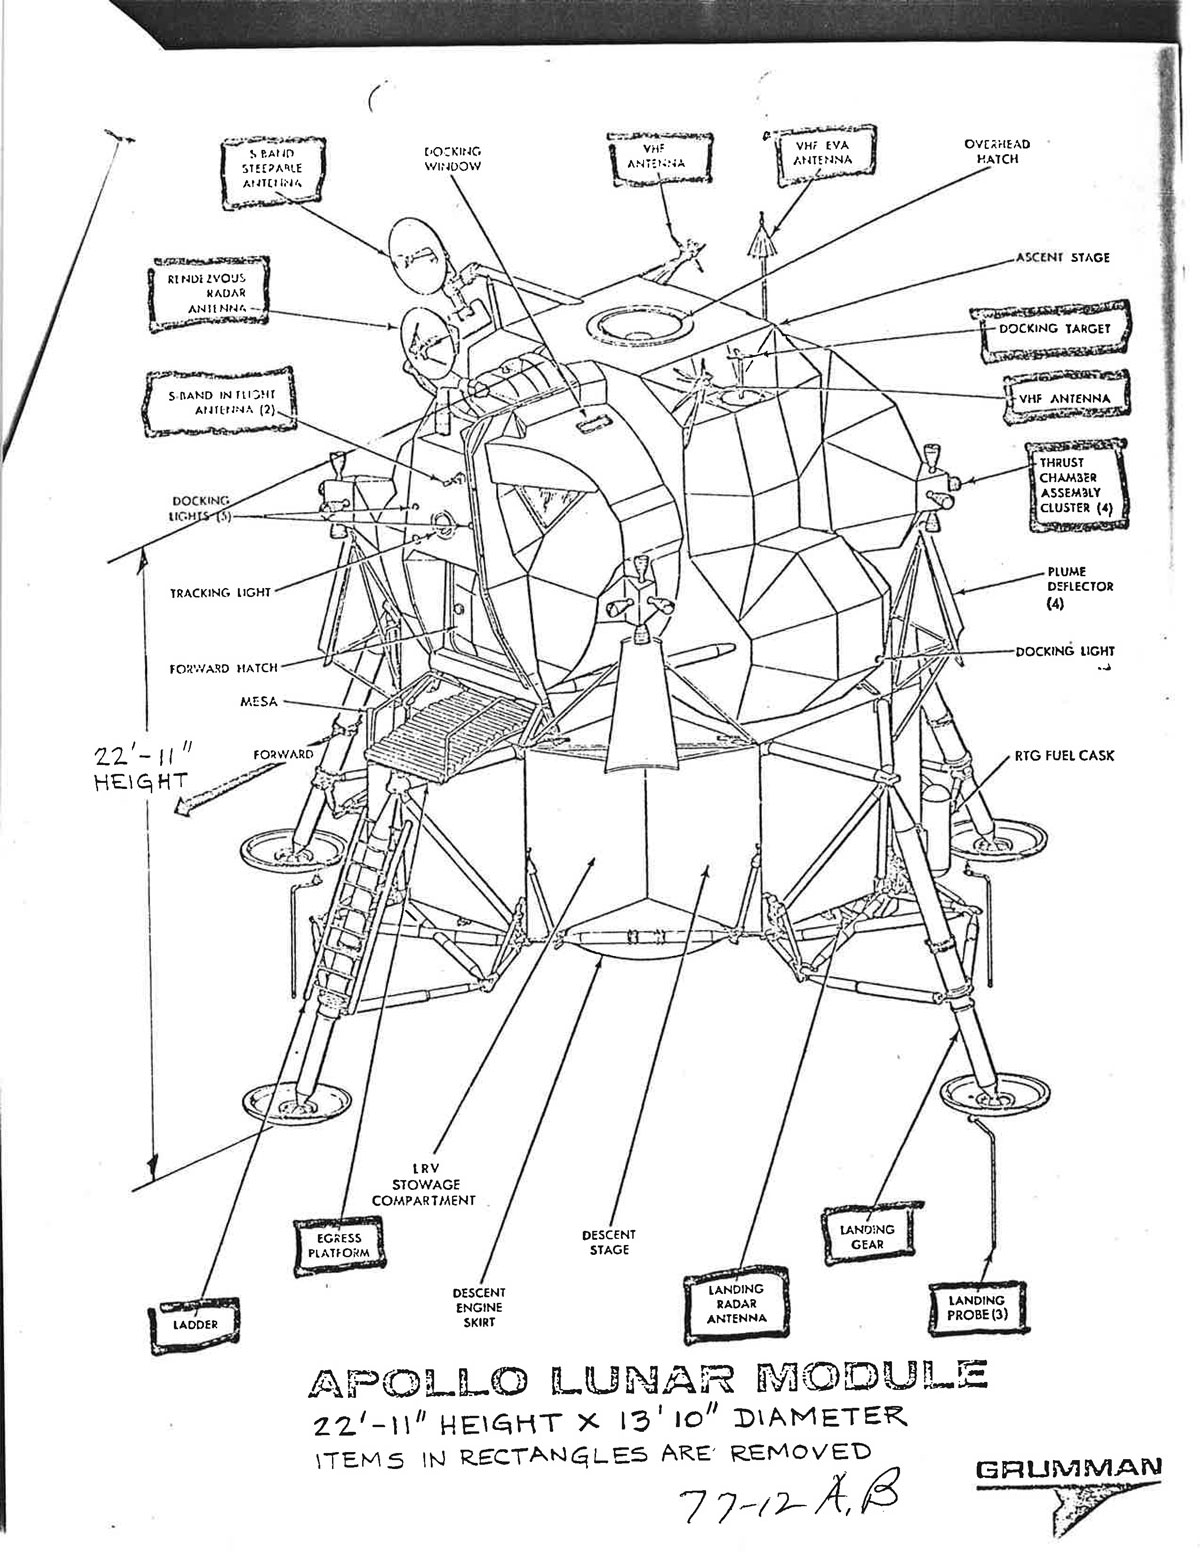 Lunar Module Quick Reference Data, Page 2